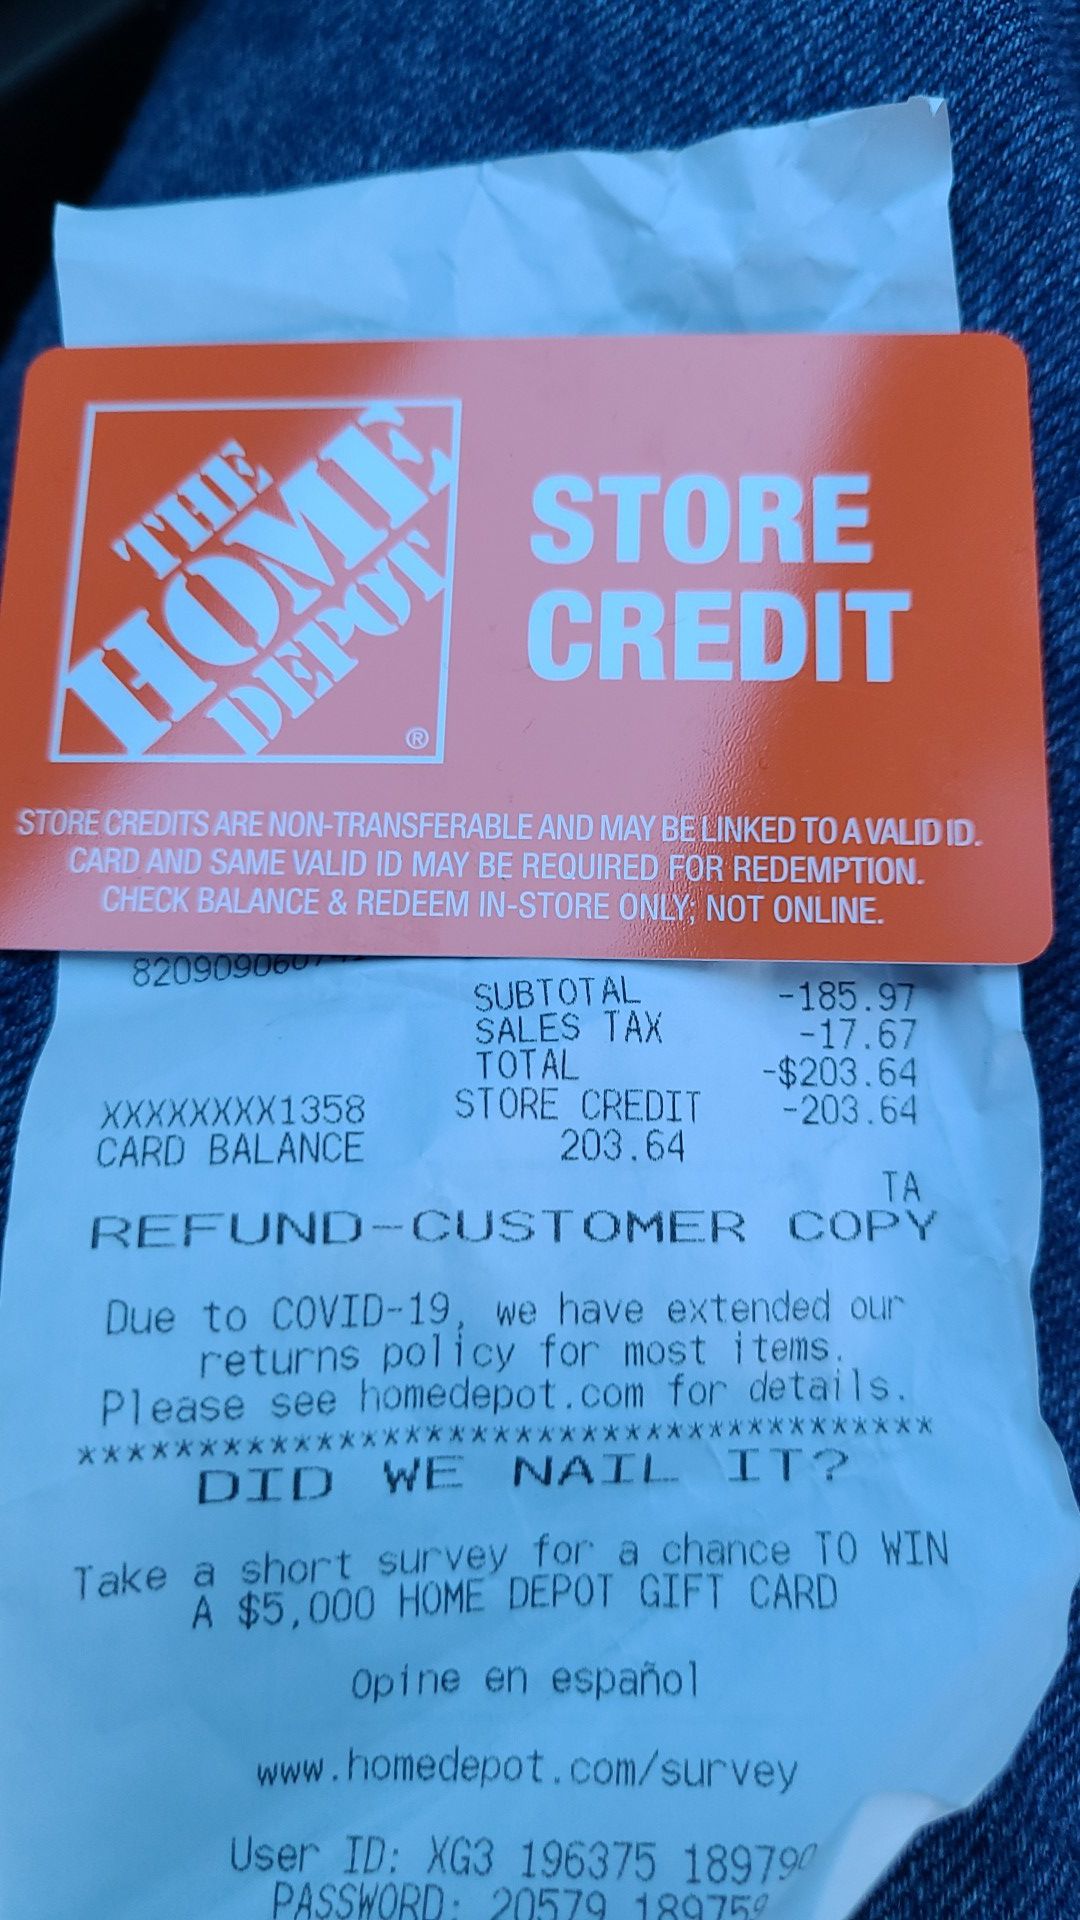 THE HOME DEPOT STORE CREDIT $203 FOR $150